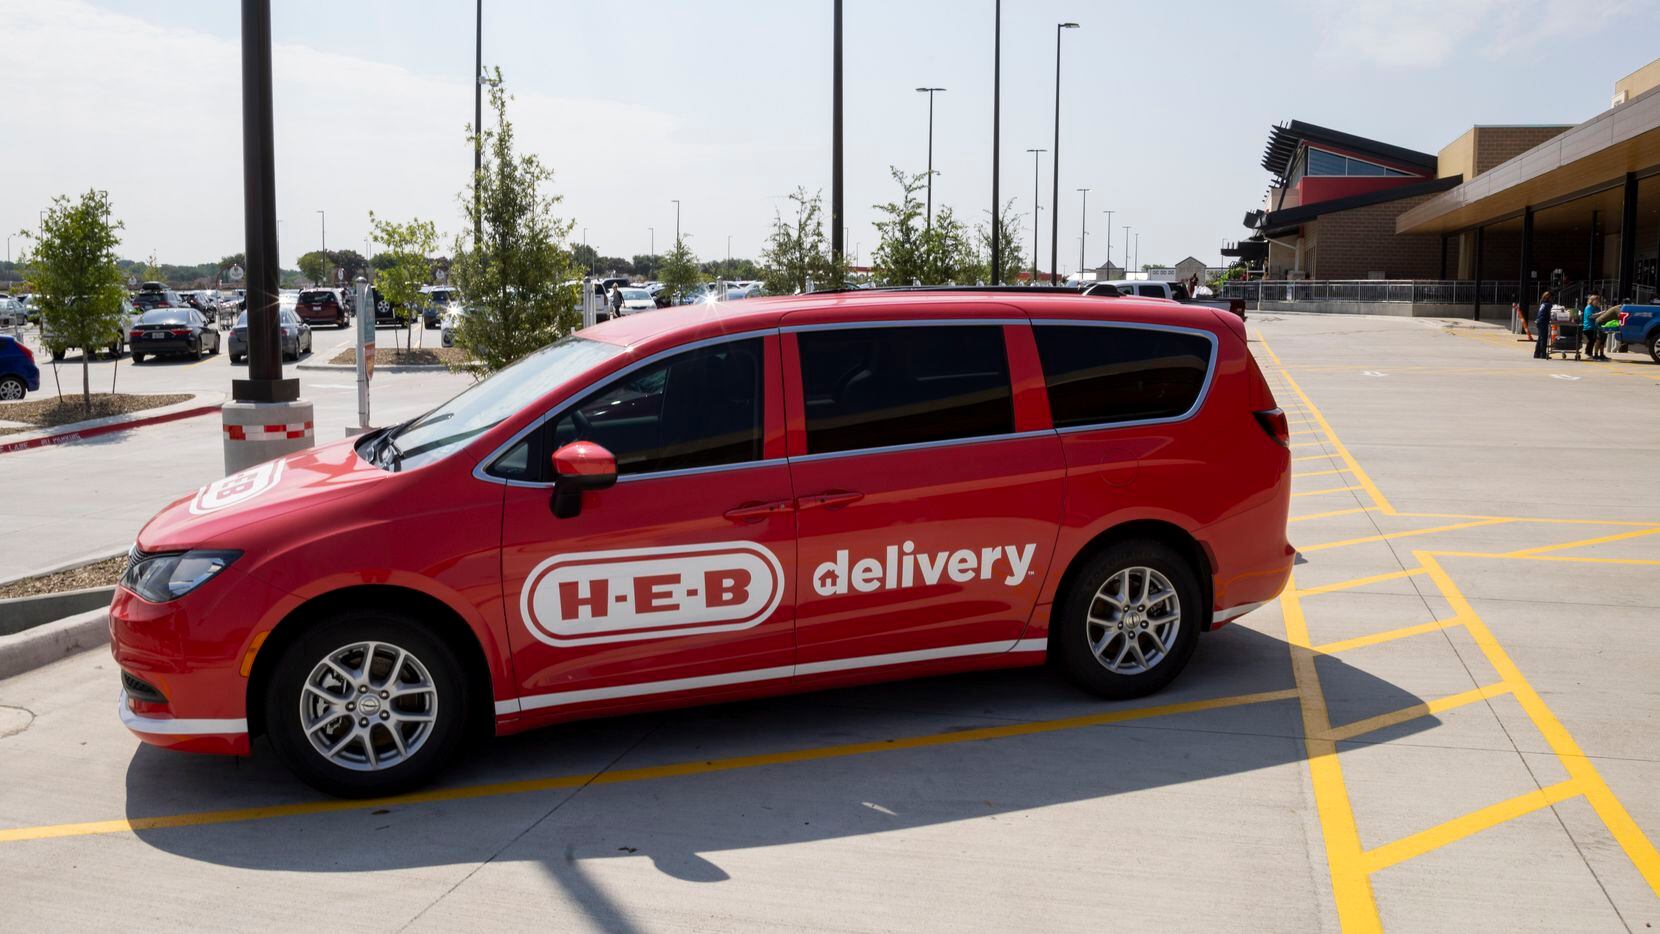 Refrigerated H-E-B delivery vans will be used to deliver goods  from the e-commerce...